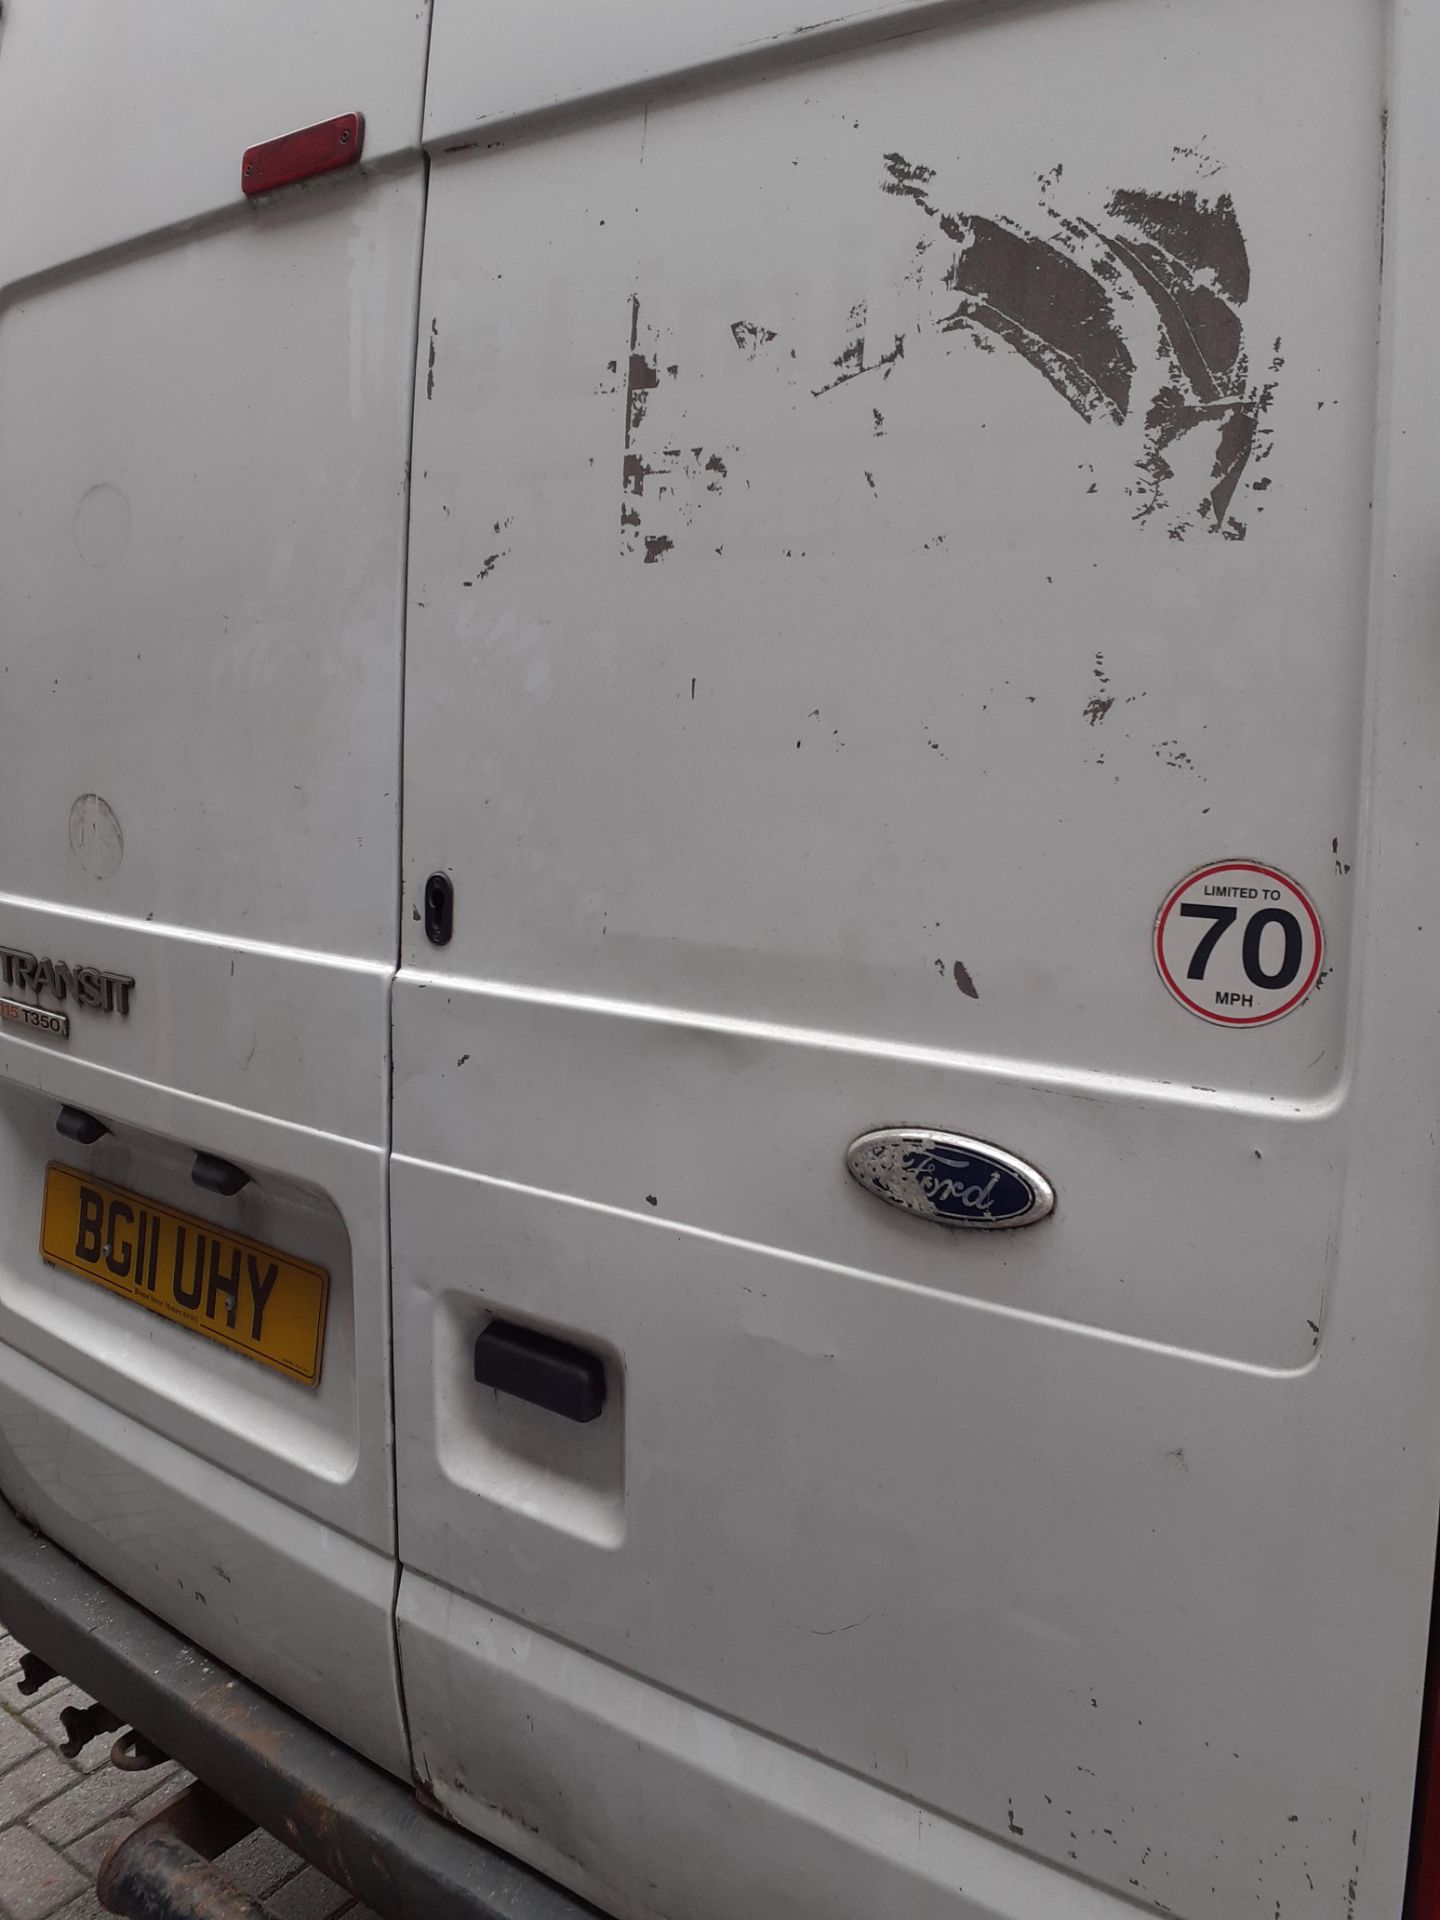 Ford Transit 115 T350 Panel Van (fitted towbar) registration BG11 UHY, first registered March - Image 10 of 13